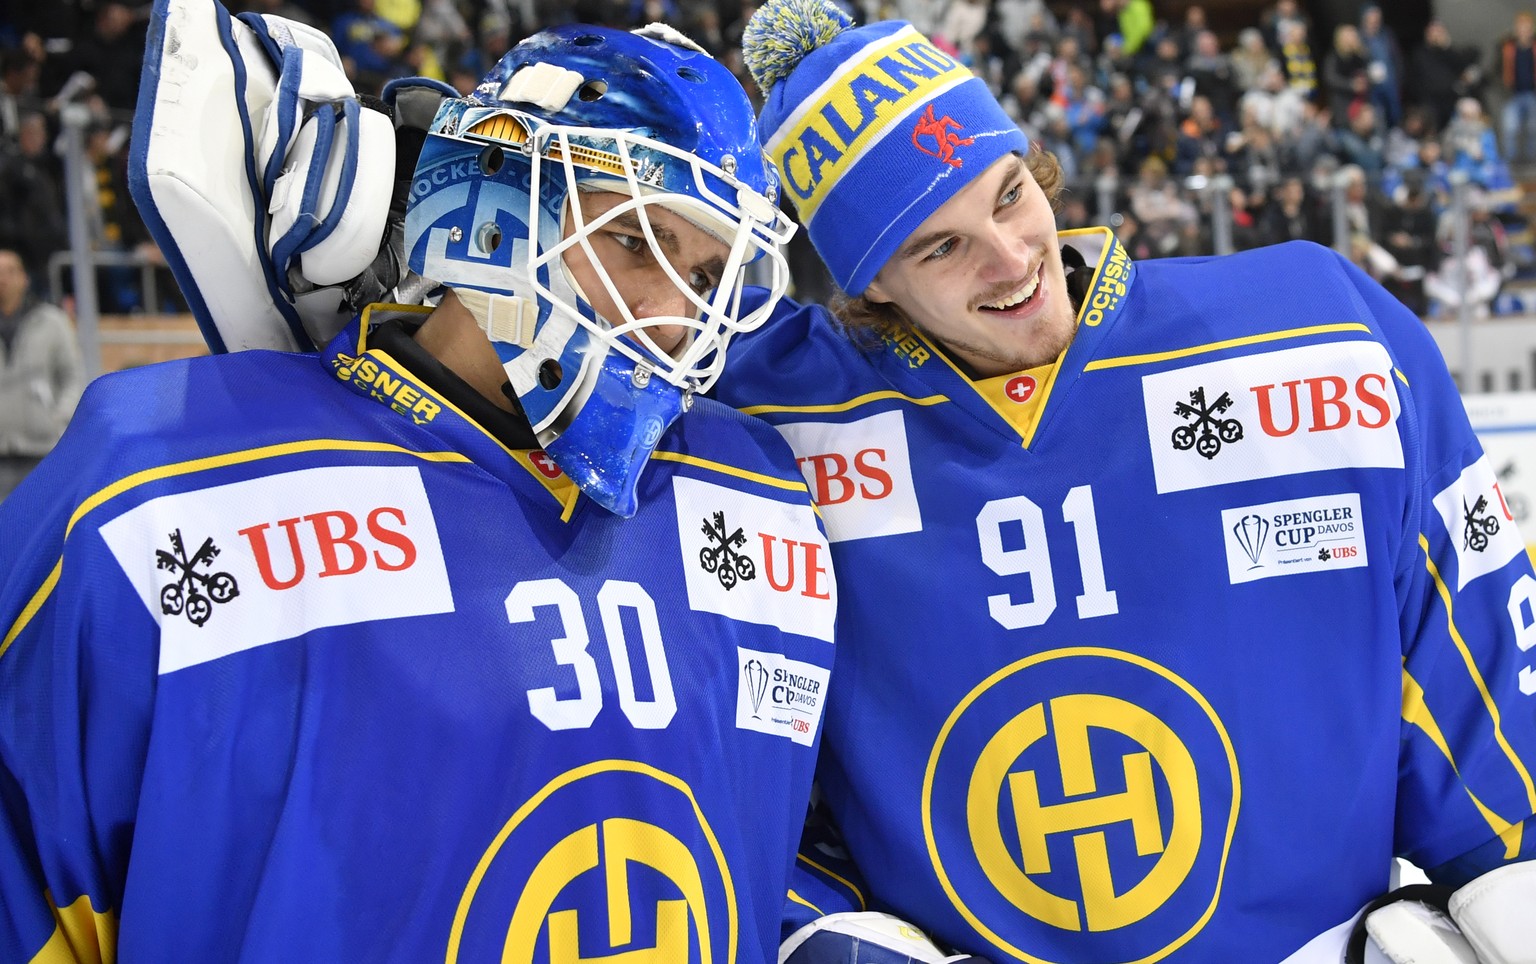 Davos&#039; Joren van Pottelberghe, left, and goalkeeper Gilles Senn celebrate after winning the game between HC Davos and Mountfield HK at the 91th Spengler Cup ice hockey tournament in Davos, Switze ...